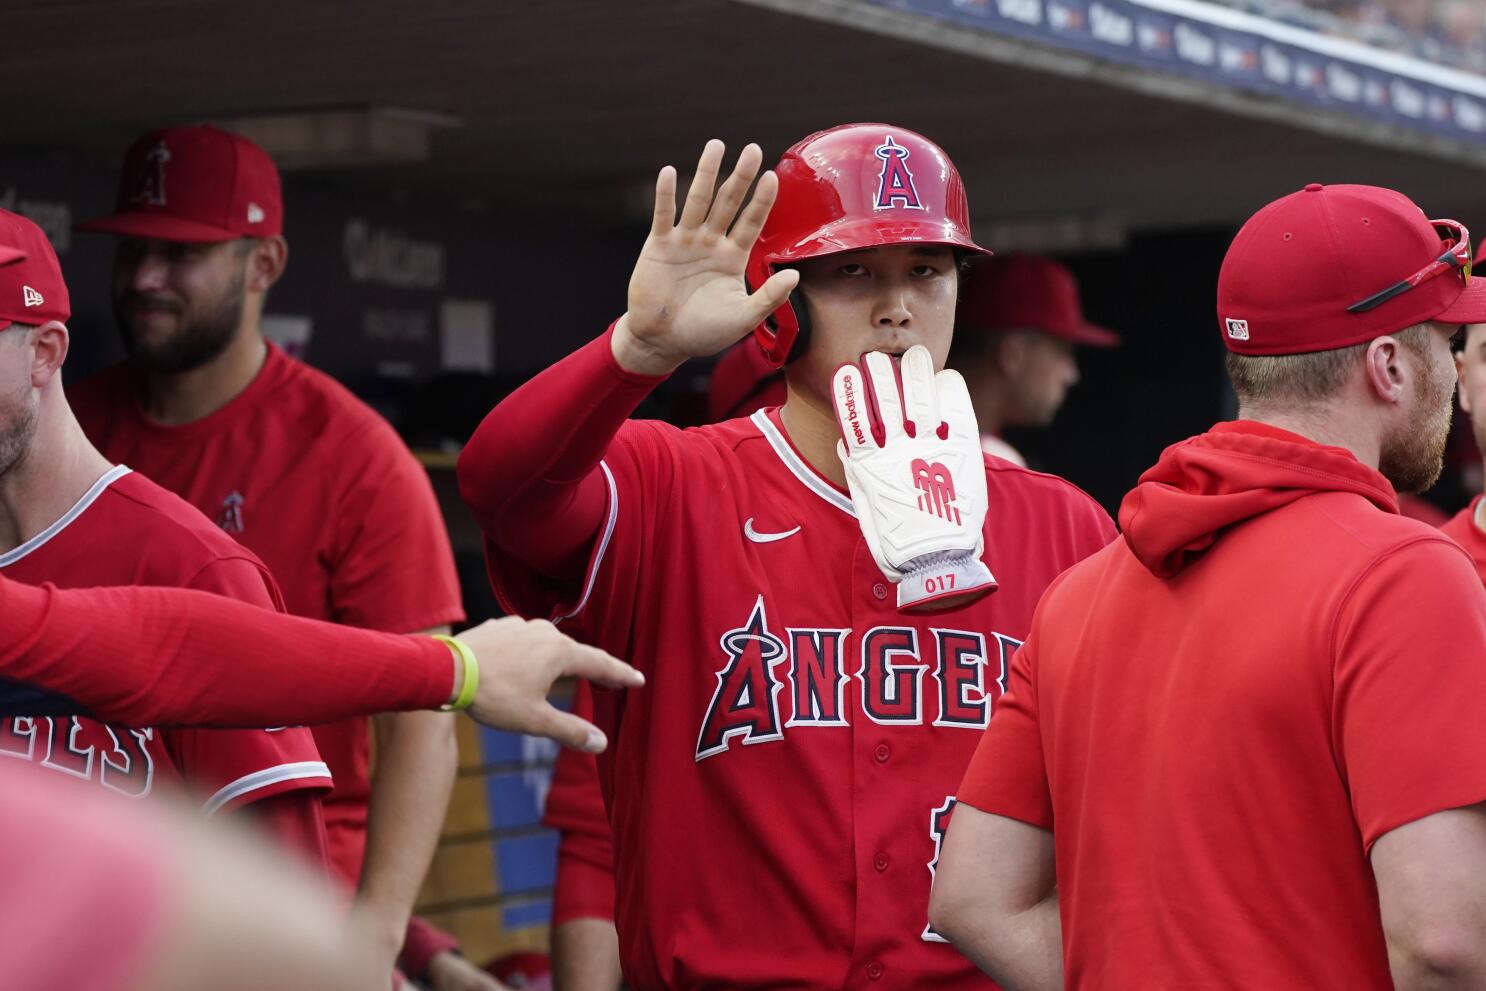 Los Angeles Angels designated hitter Shohei Ohtani wears a jersey